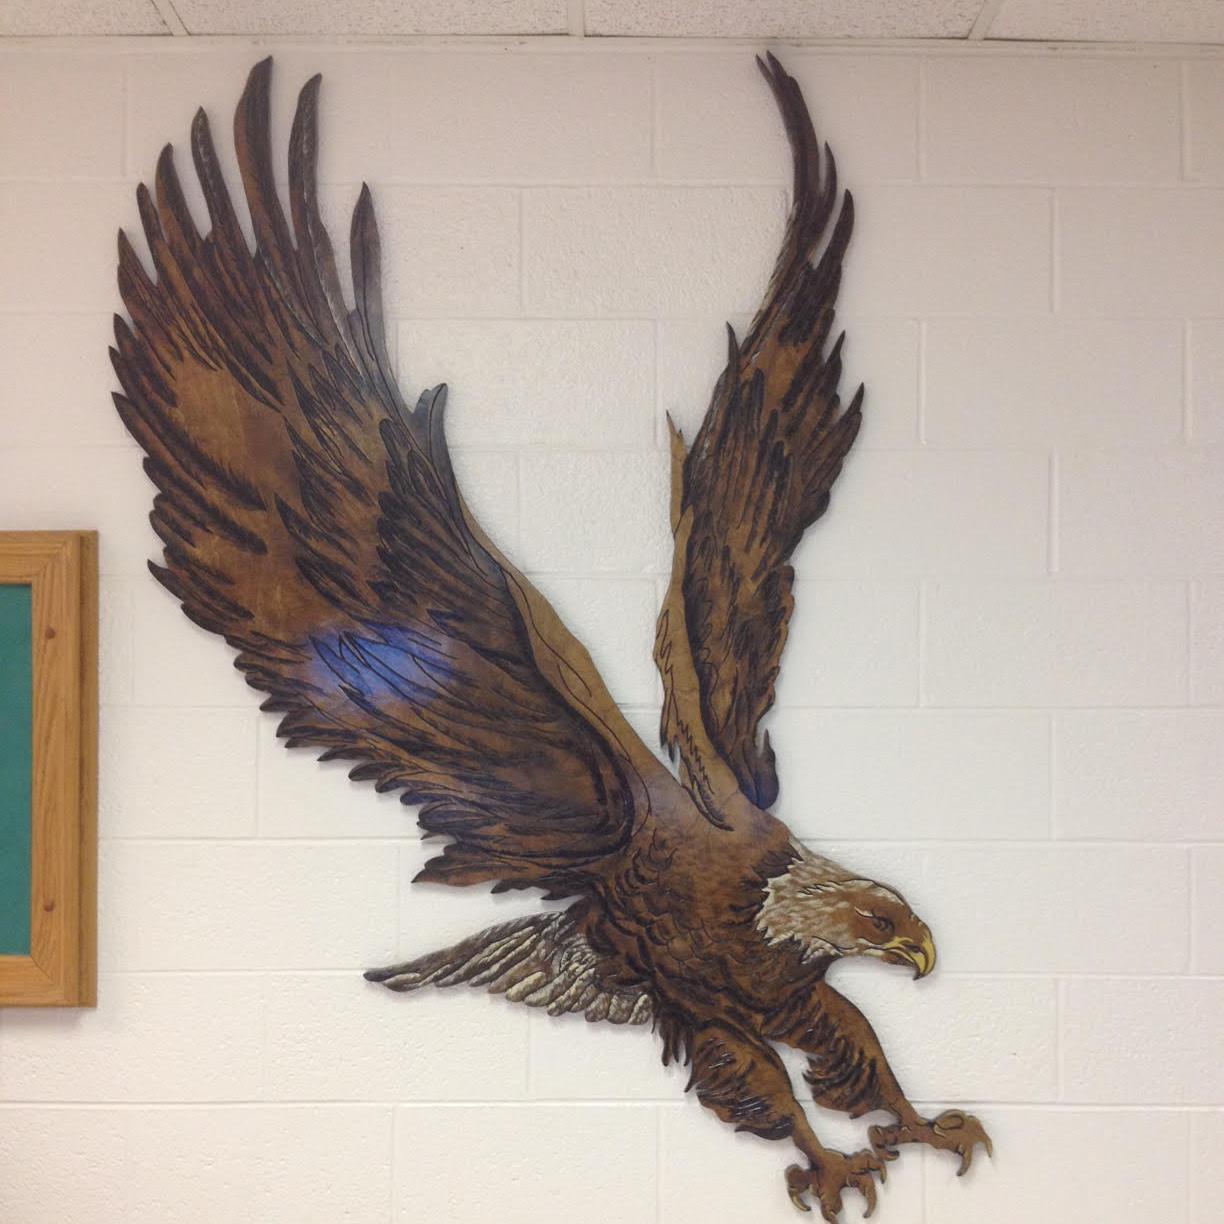 We are R.A.R.E. (Respectful, Aware, Responsible, Engaged) birds | Fauquier County Public Schools